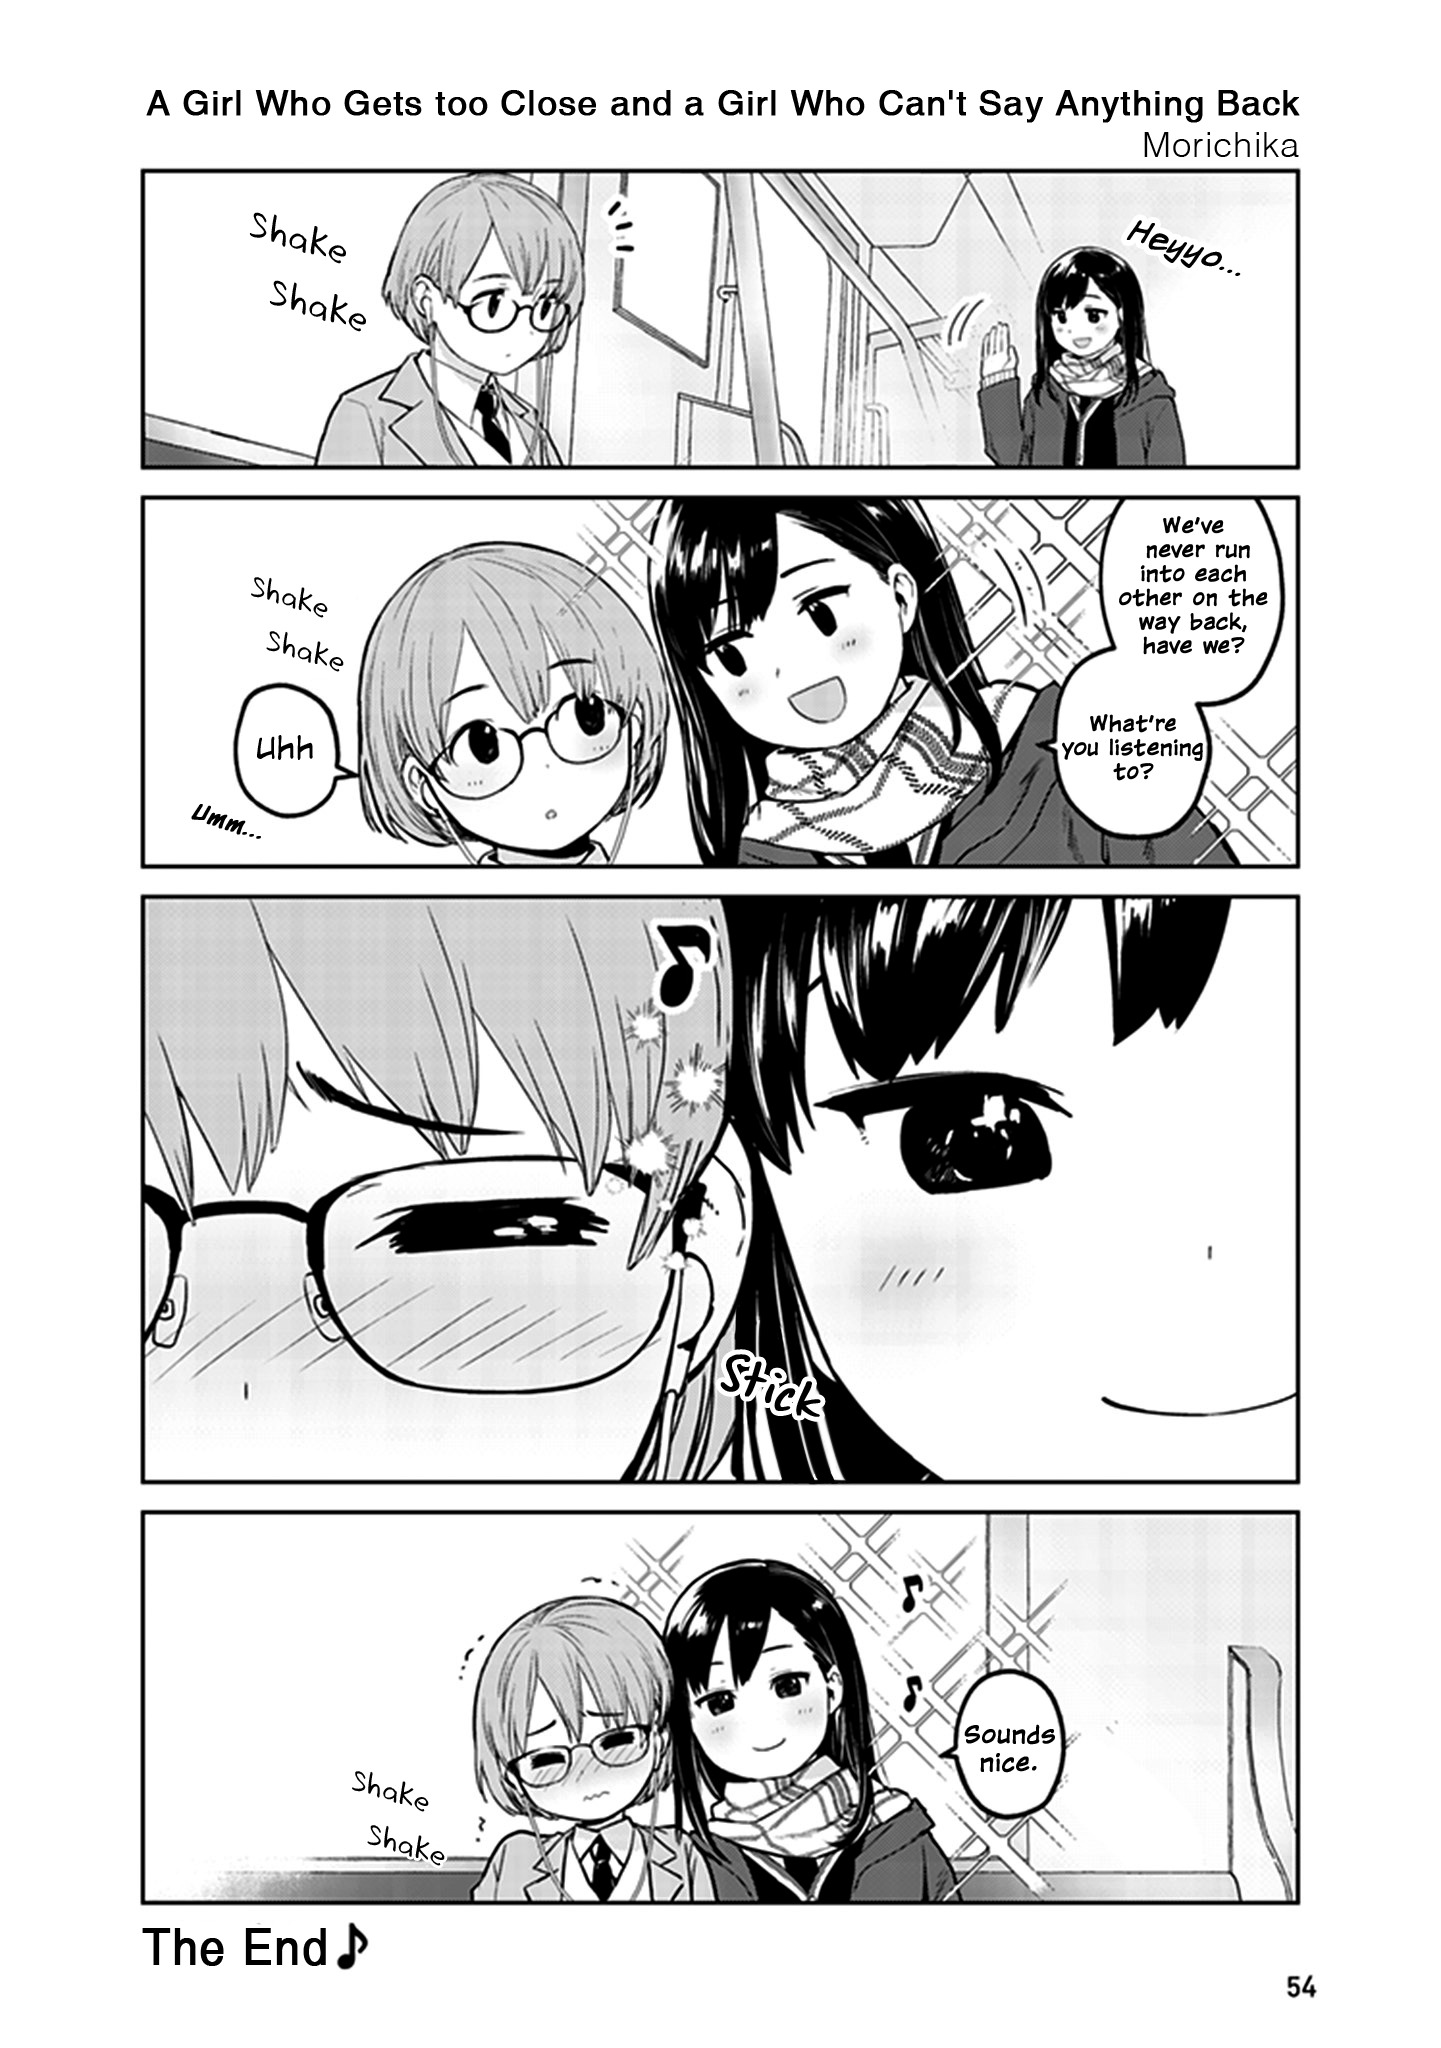 I Want to Hug a Girl Like This! Short Stories vol.1 ch.15